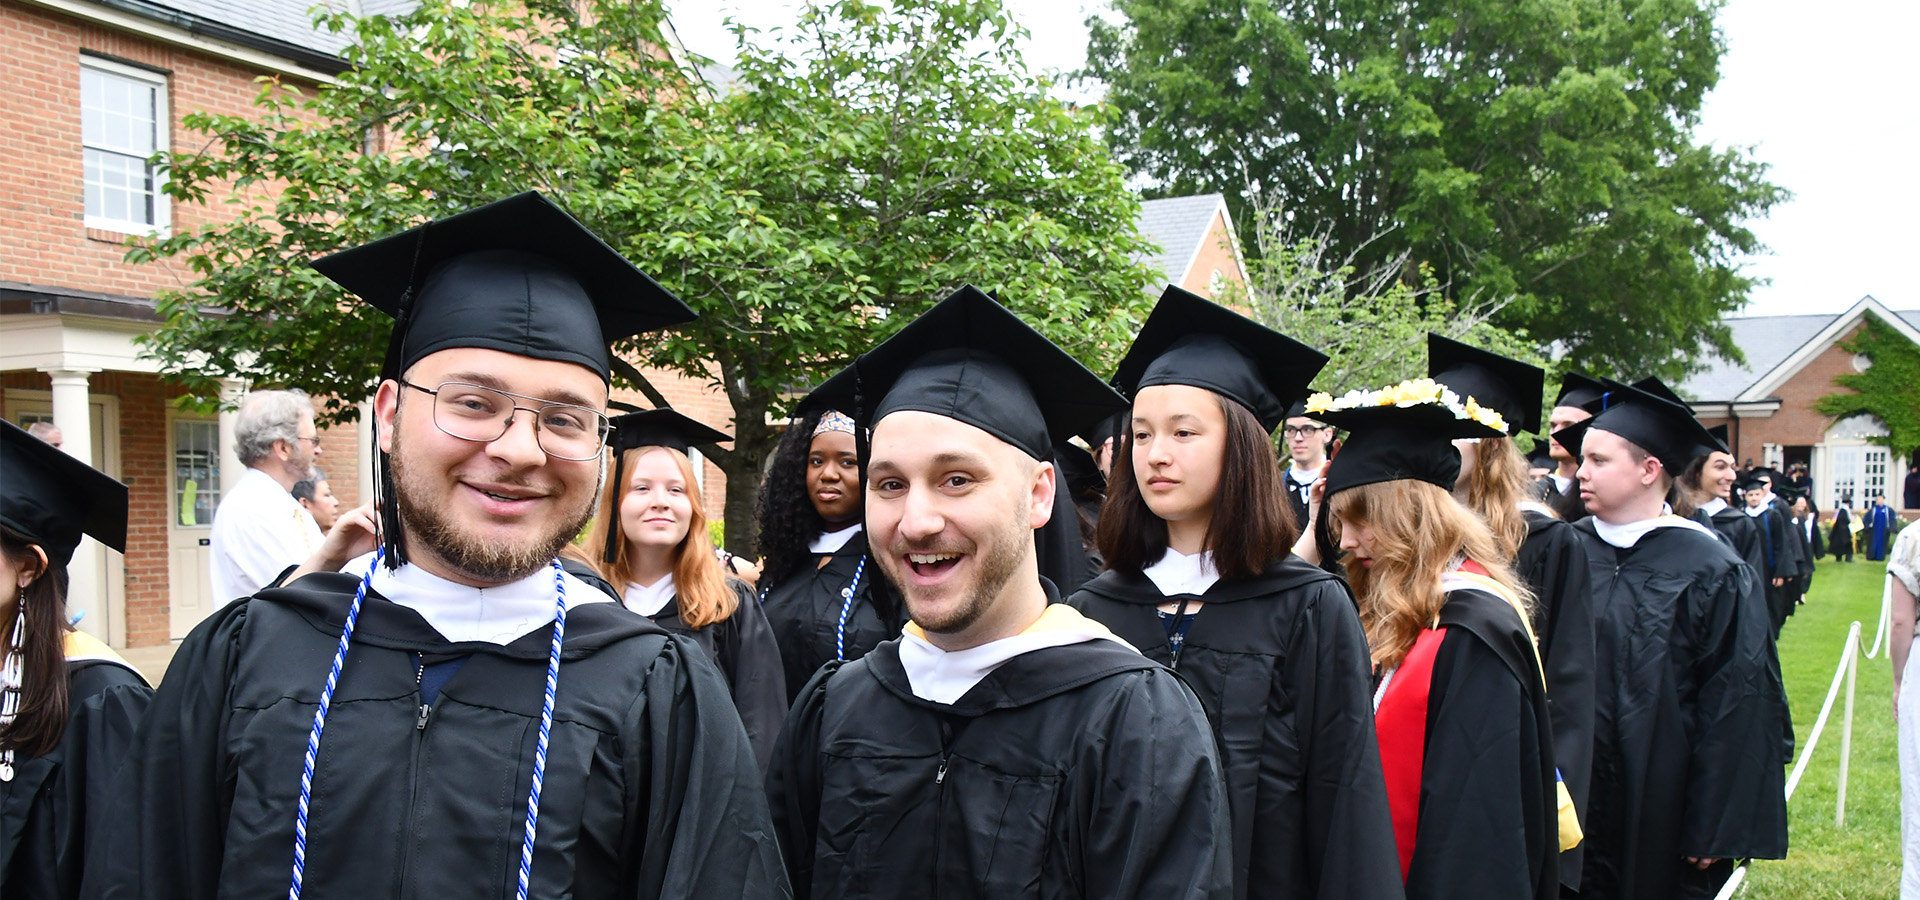 Image of students dressed in graduation attire in a line